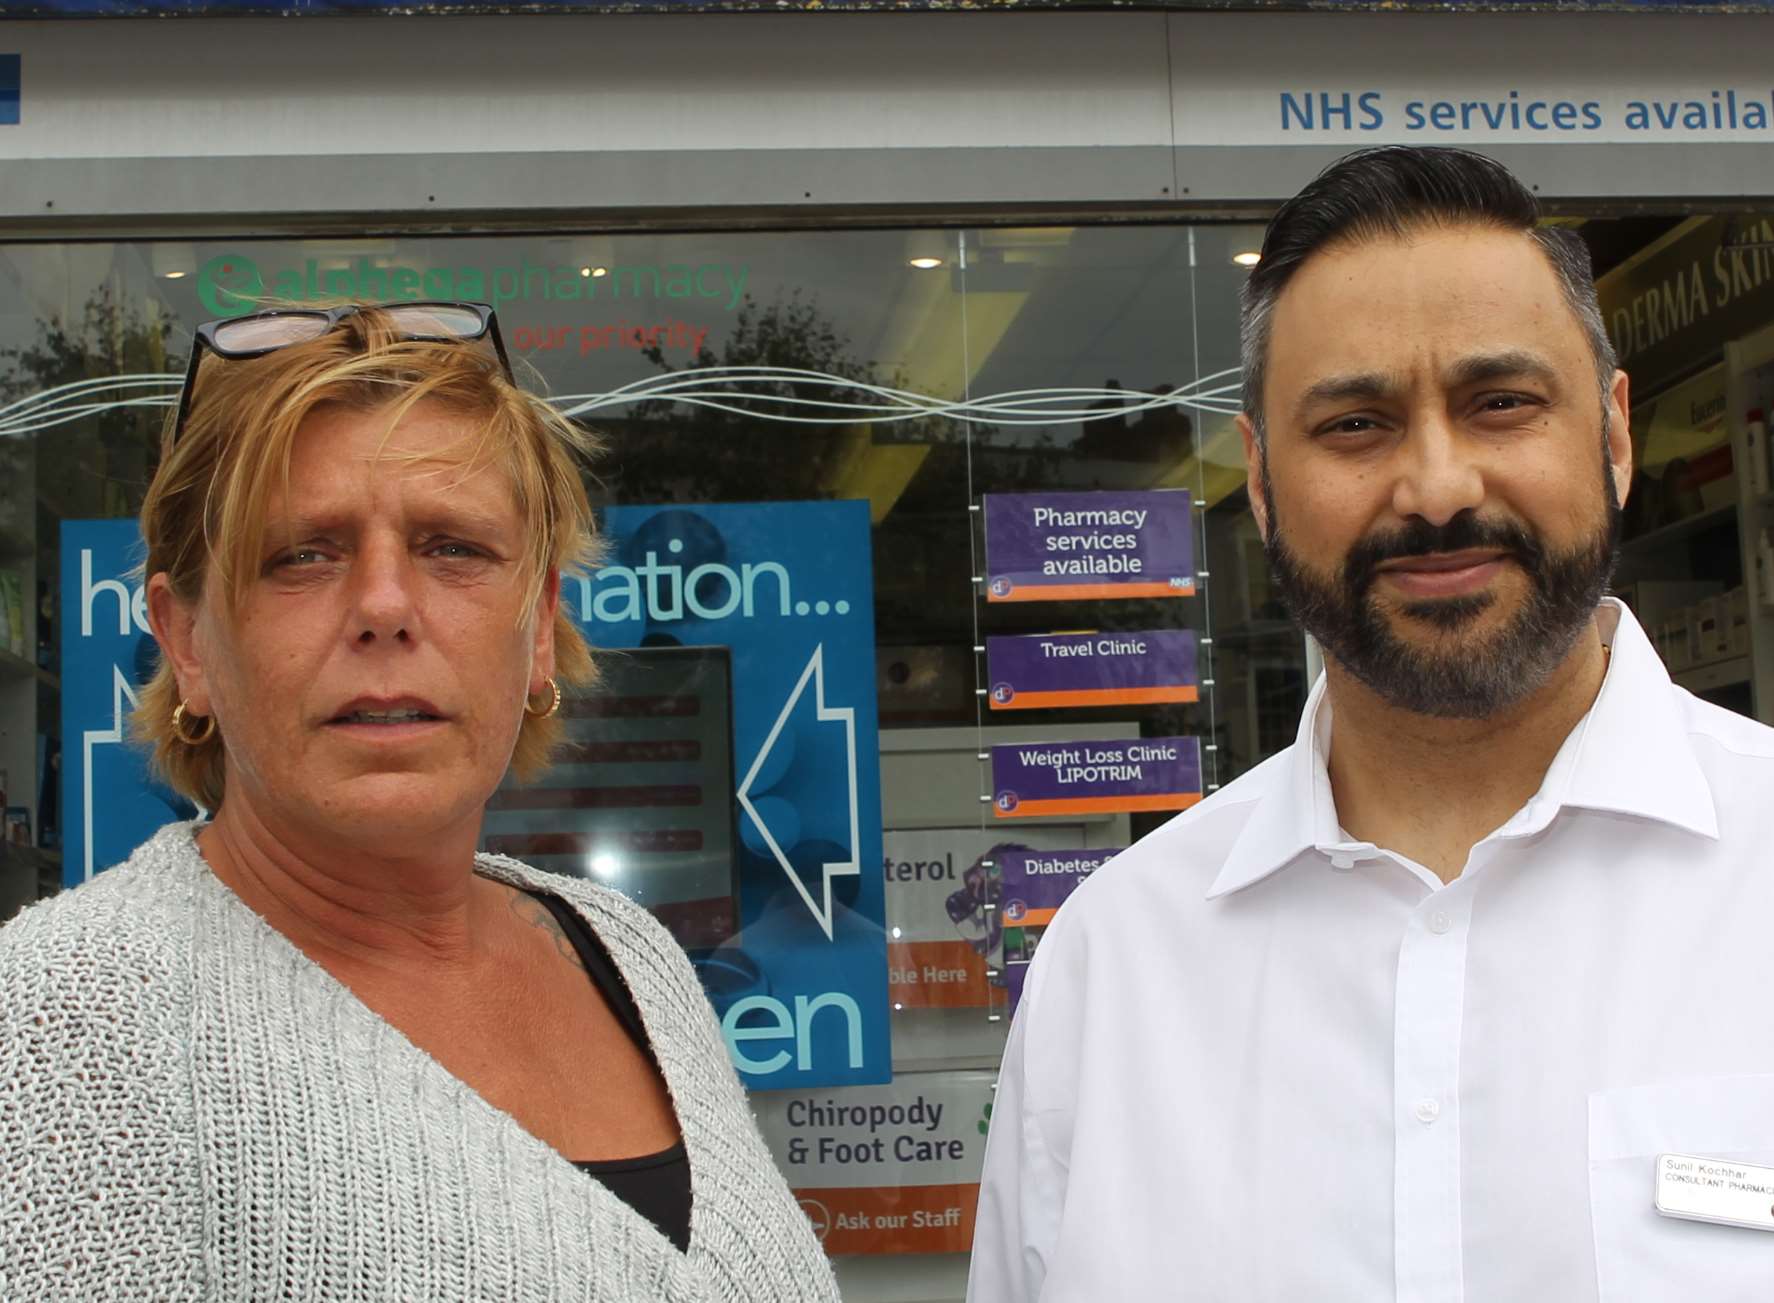 Louise Street discovered she has skin cancer after a mole screening with Sunil Kochhar, a pharmacist at Regent Pharmacy in Gravesend. Picture By: John Westhrop